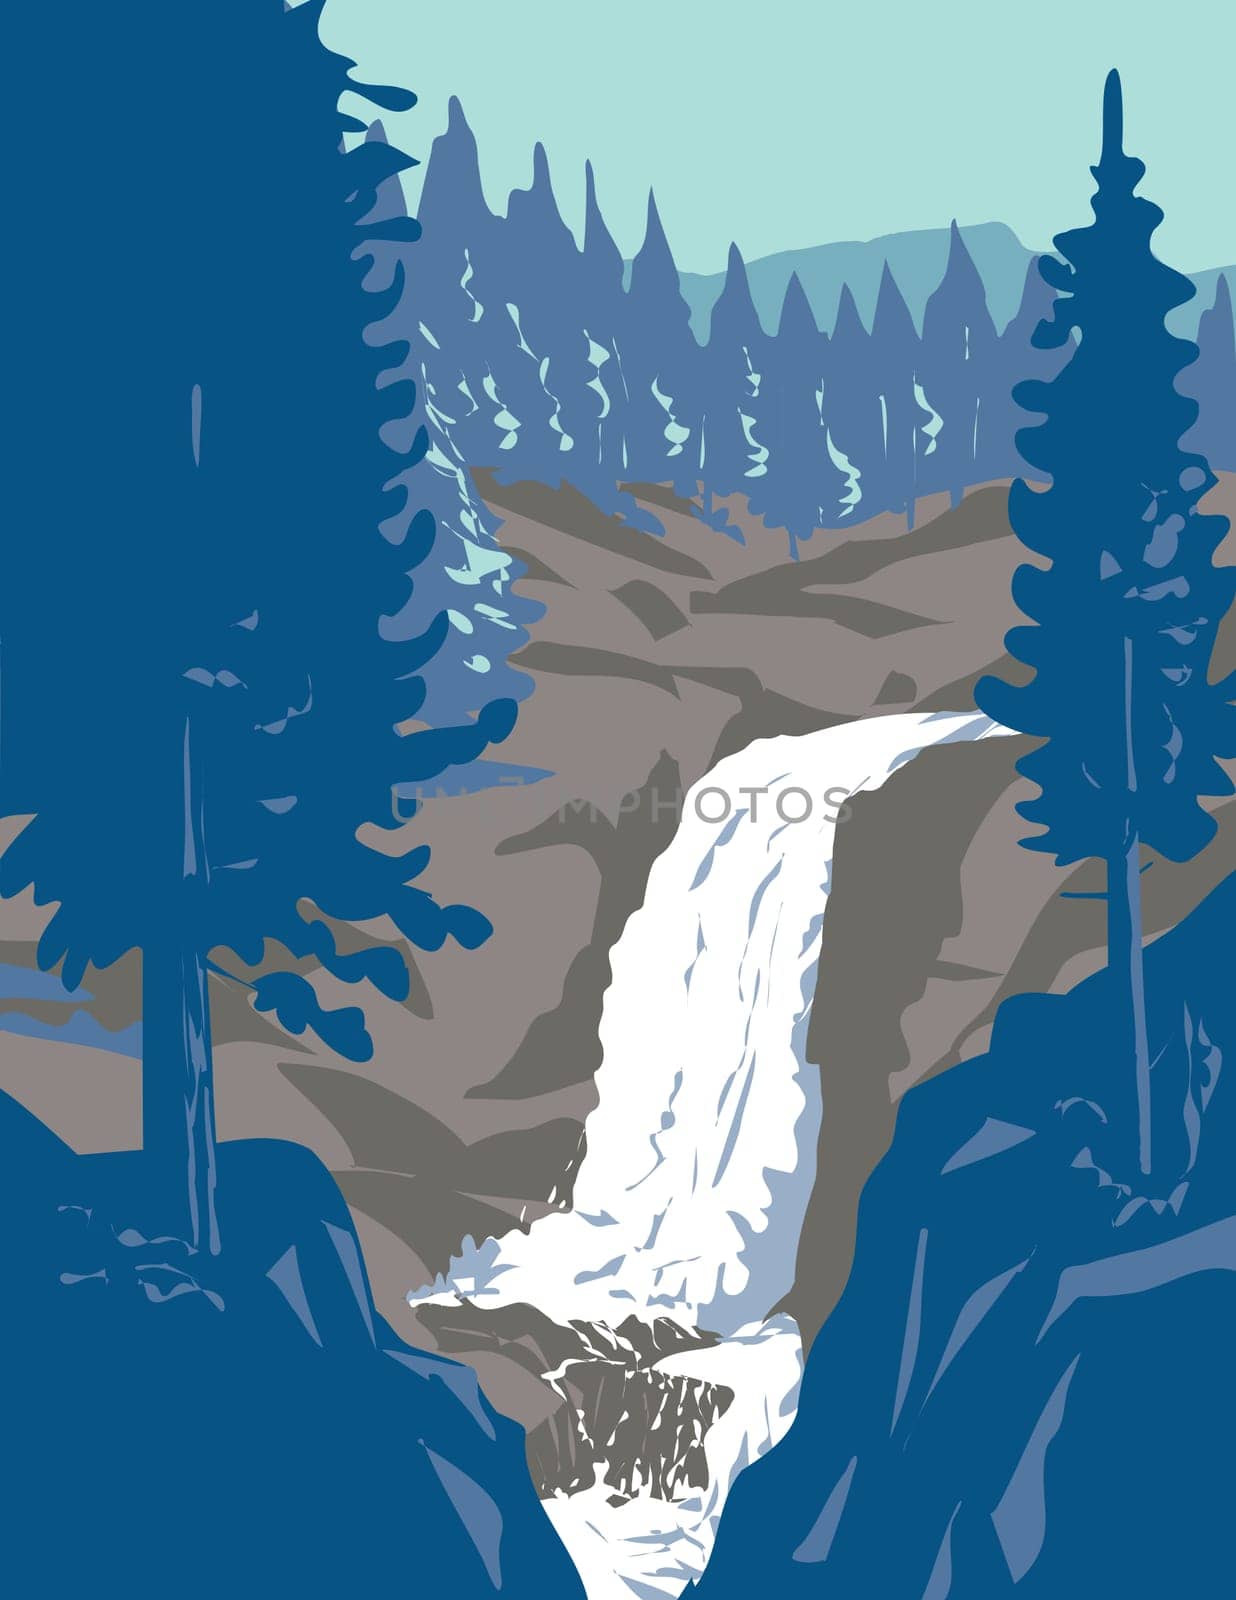 WPA poster art of Alberta Falls in Rocky Mountain National Park in northern Colorado, USA done in works project administration or federal art project style.
